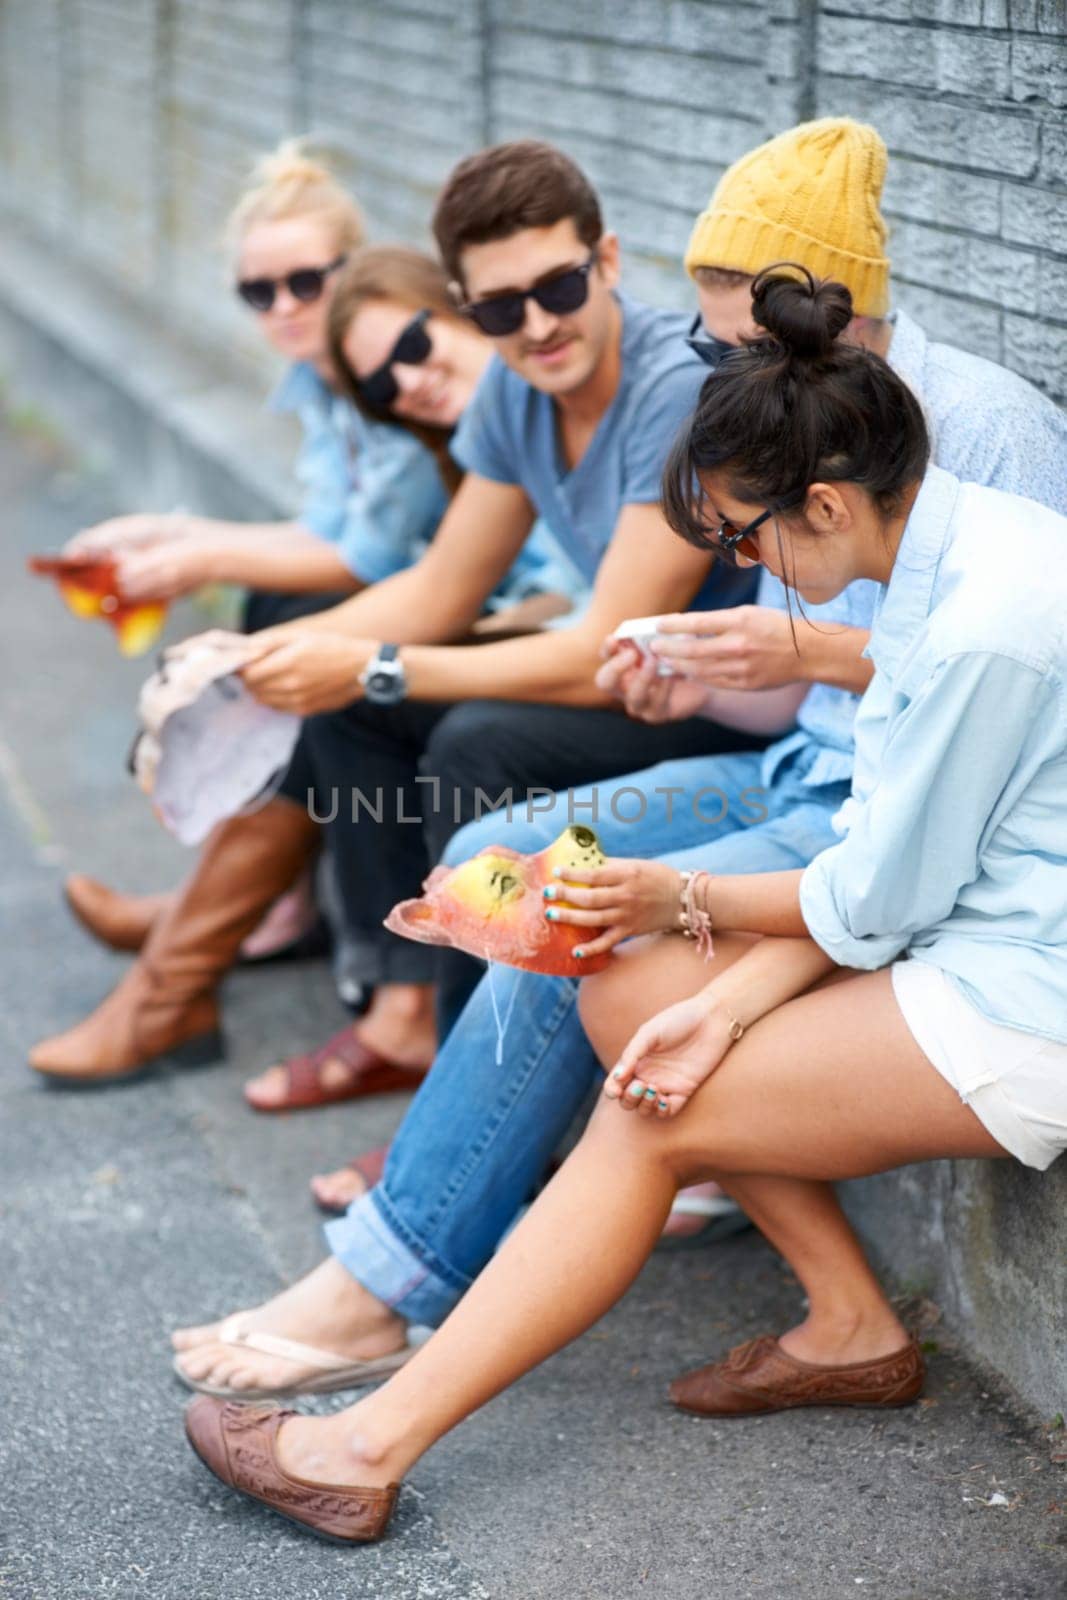 Street, friends and people with animal mask for fashion party, bonding and talking. Group, sunglasses and dress up in city, stylish men and women or hipsters sitting outdoor together for Halloween.